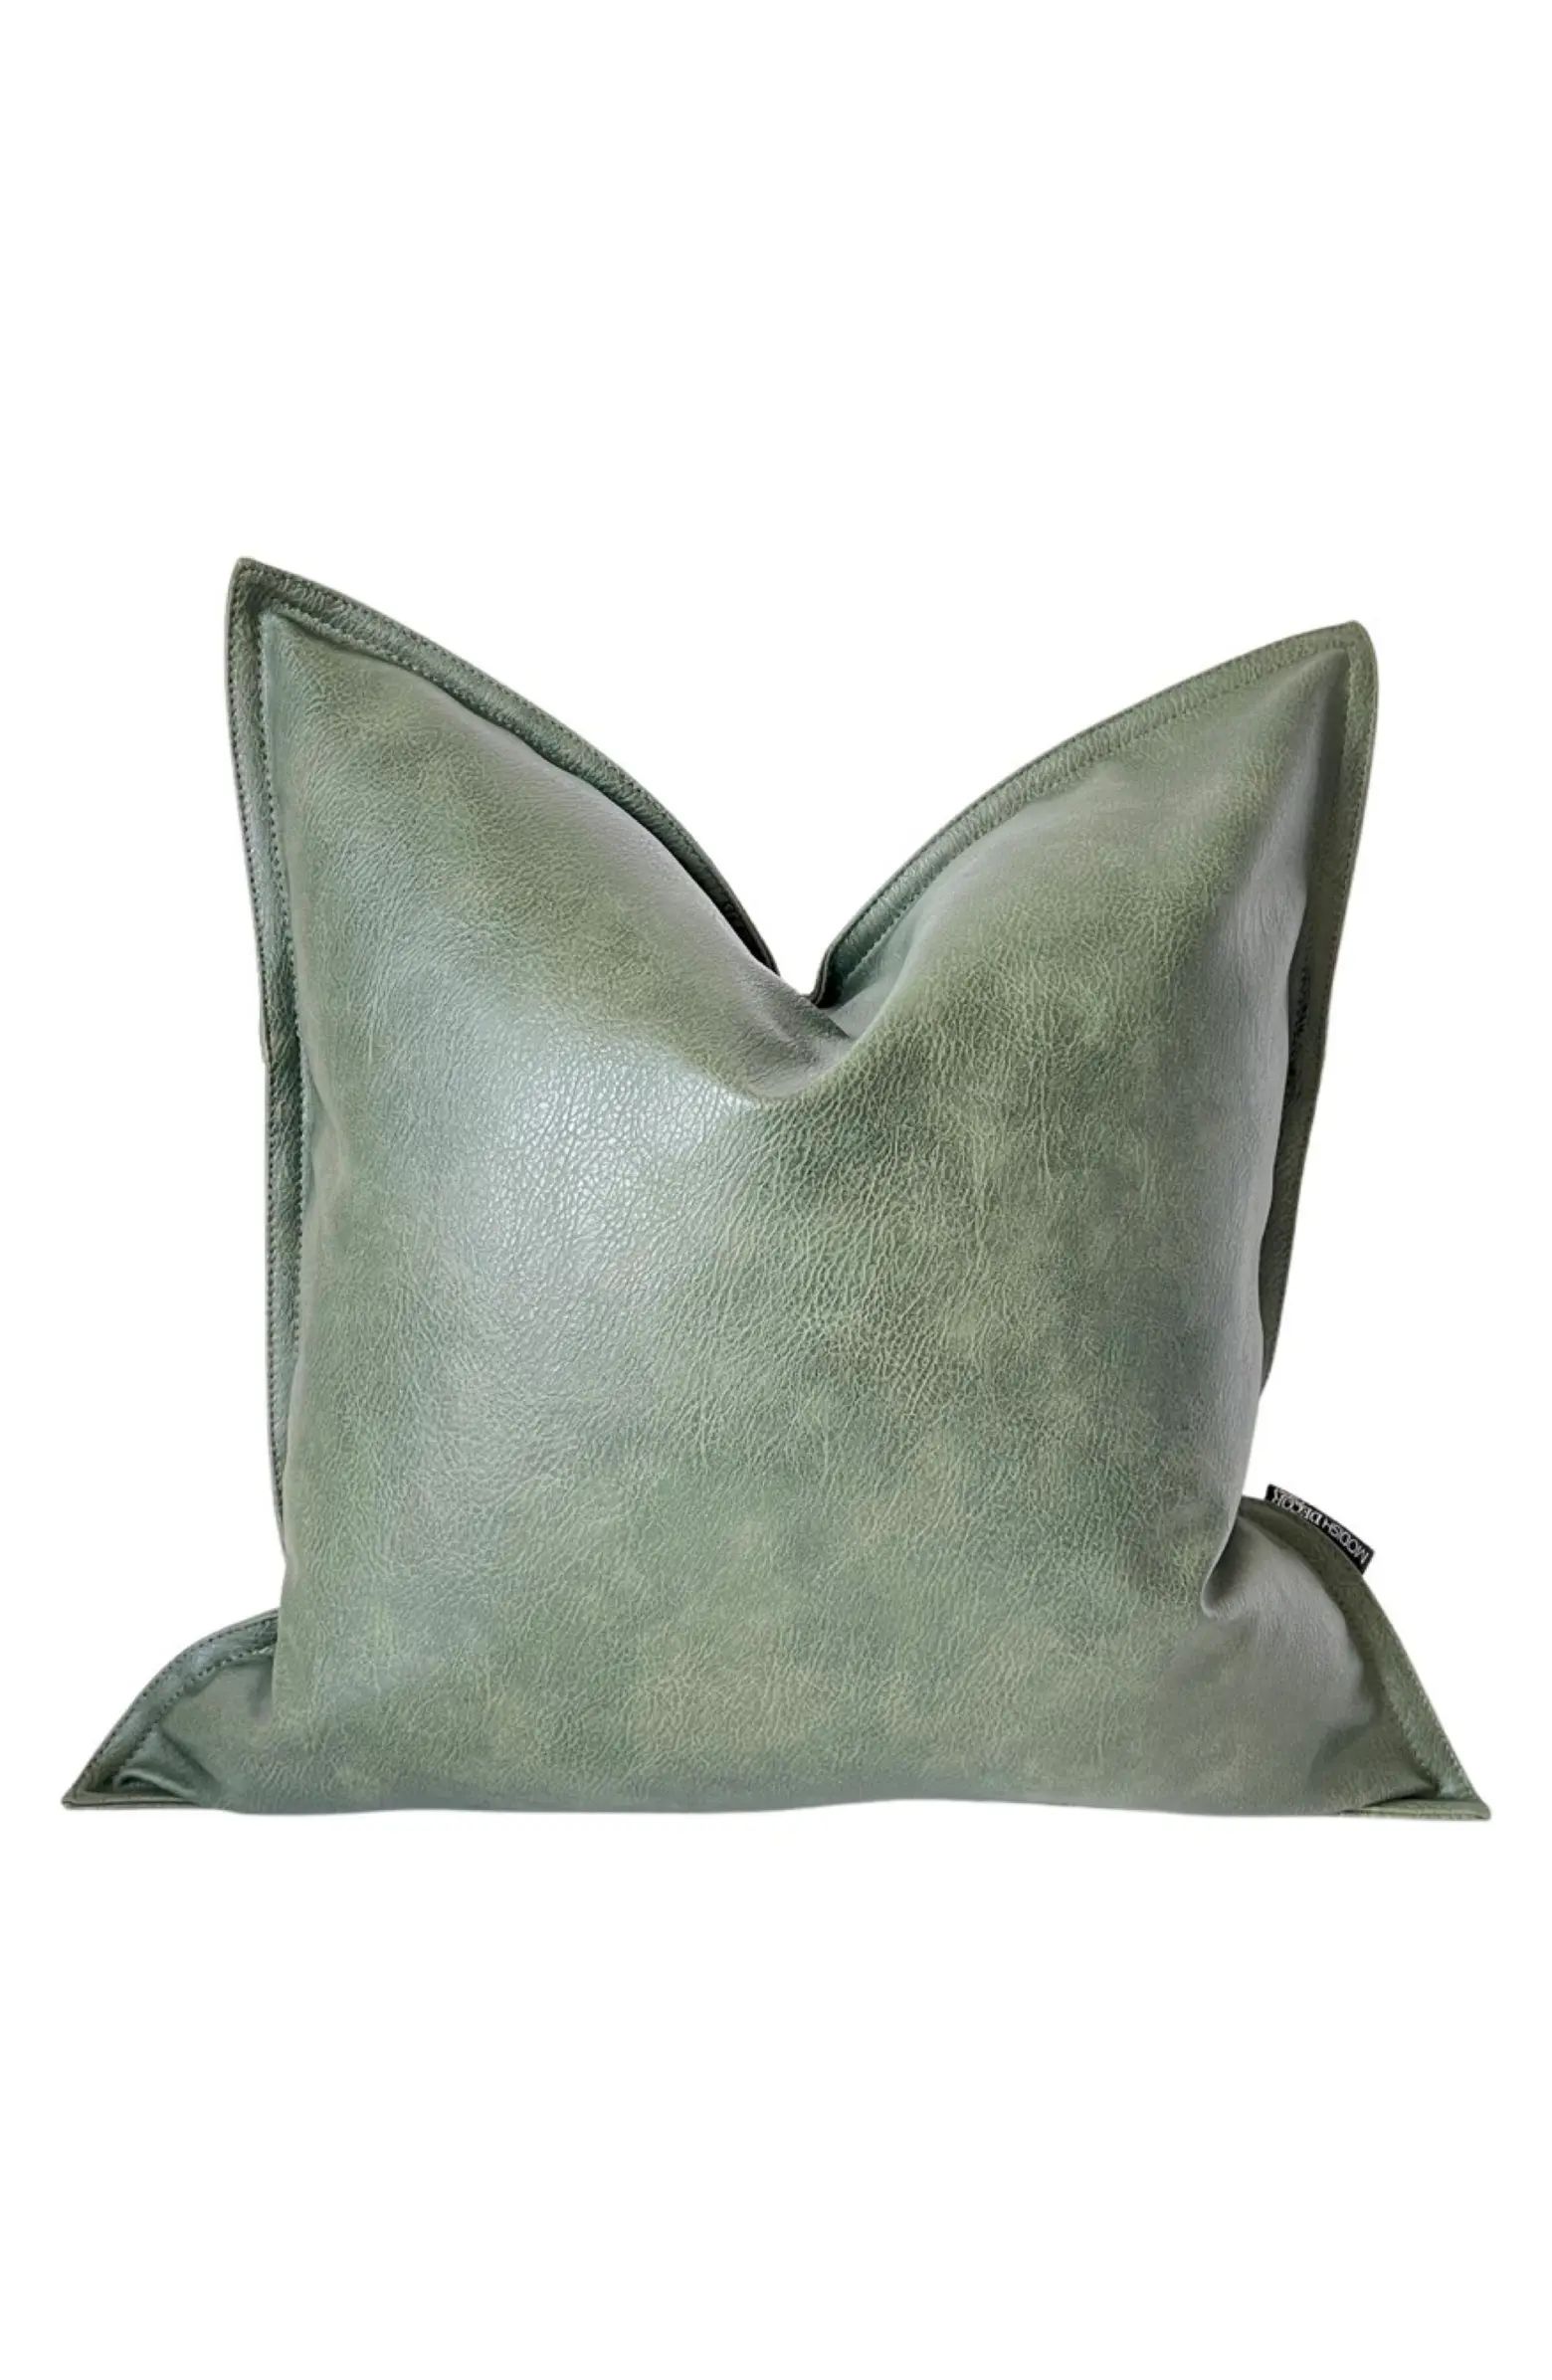 MODISH DECOR PILLOWS Faux Leather Pillow Cover | Nordstrom | Nordstrom